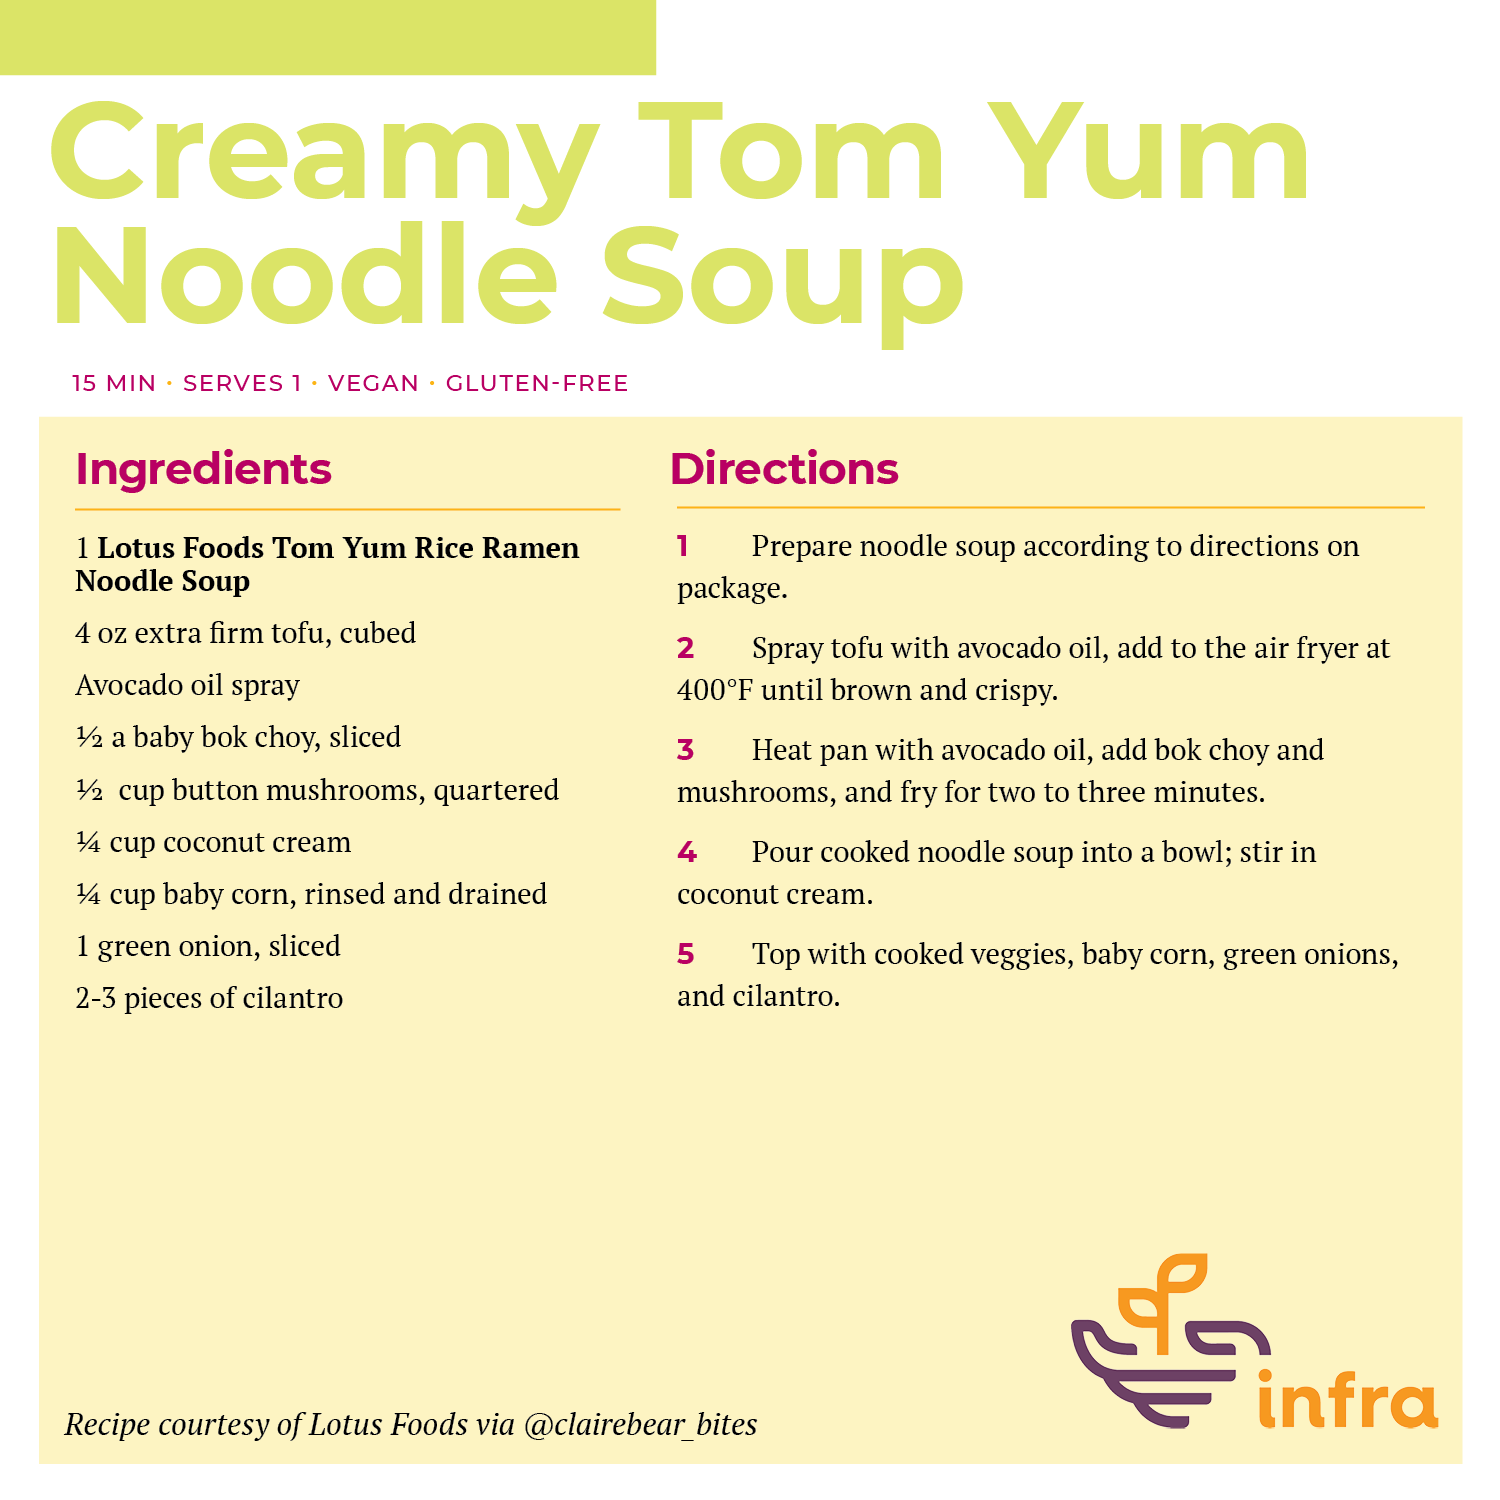 Creamy Tom Yum Noodle Soup Recipe.png